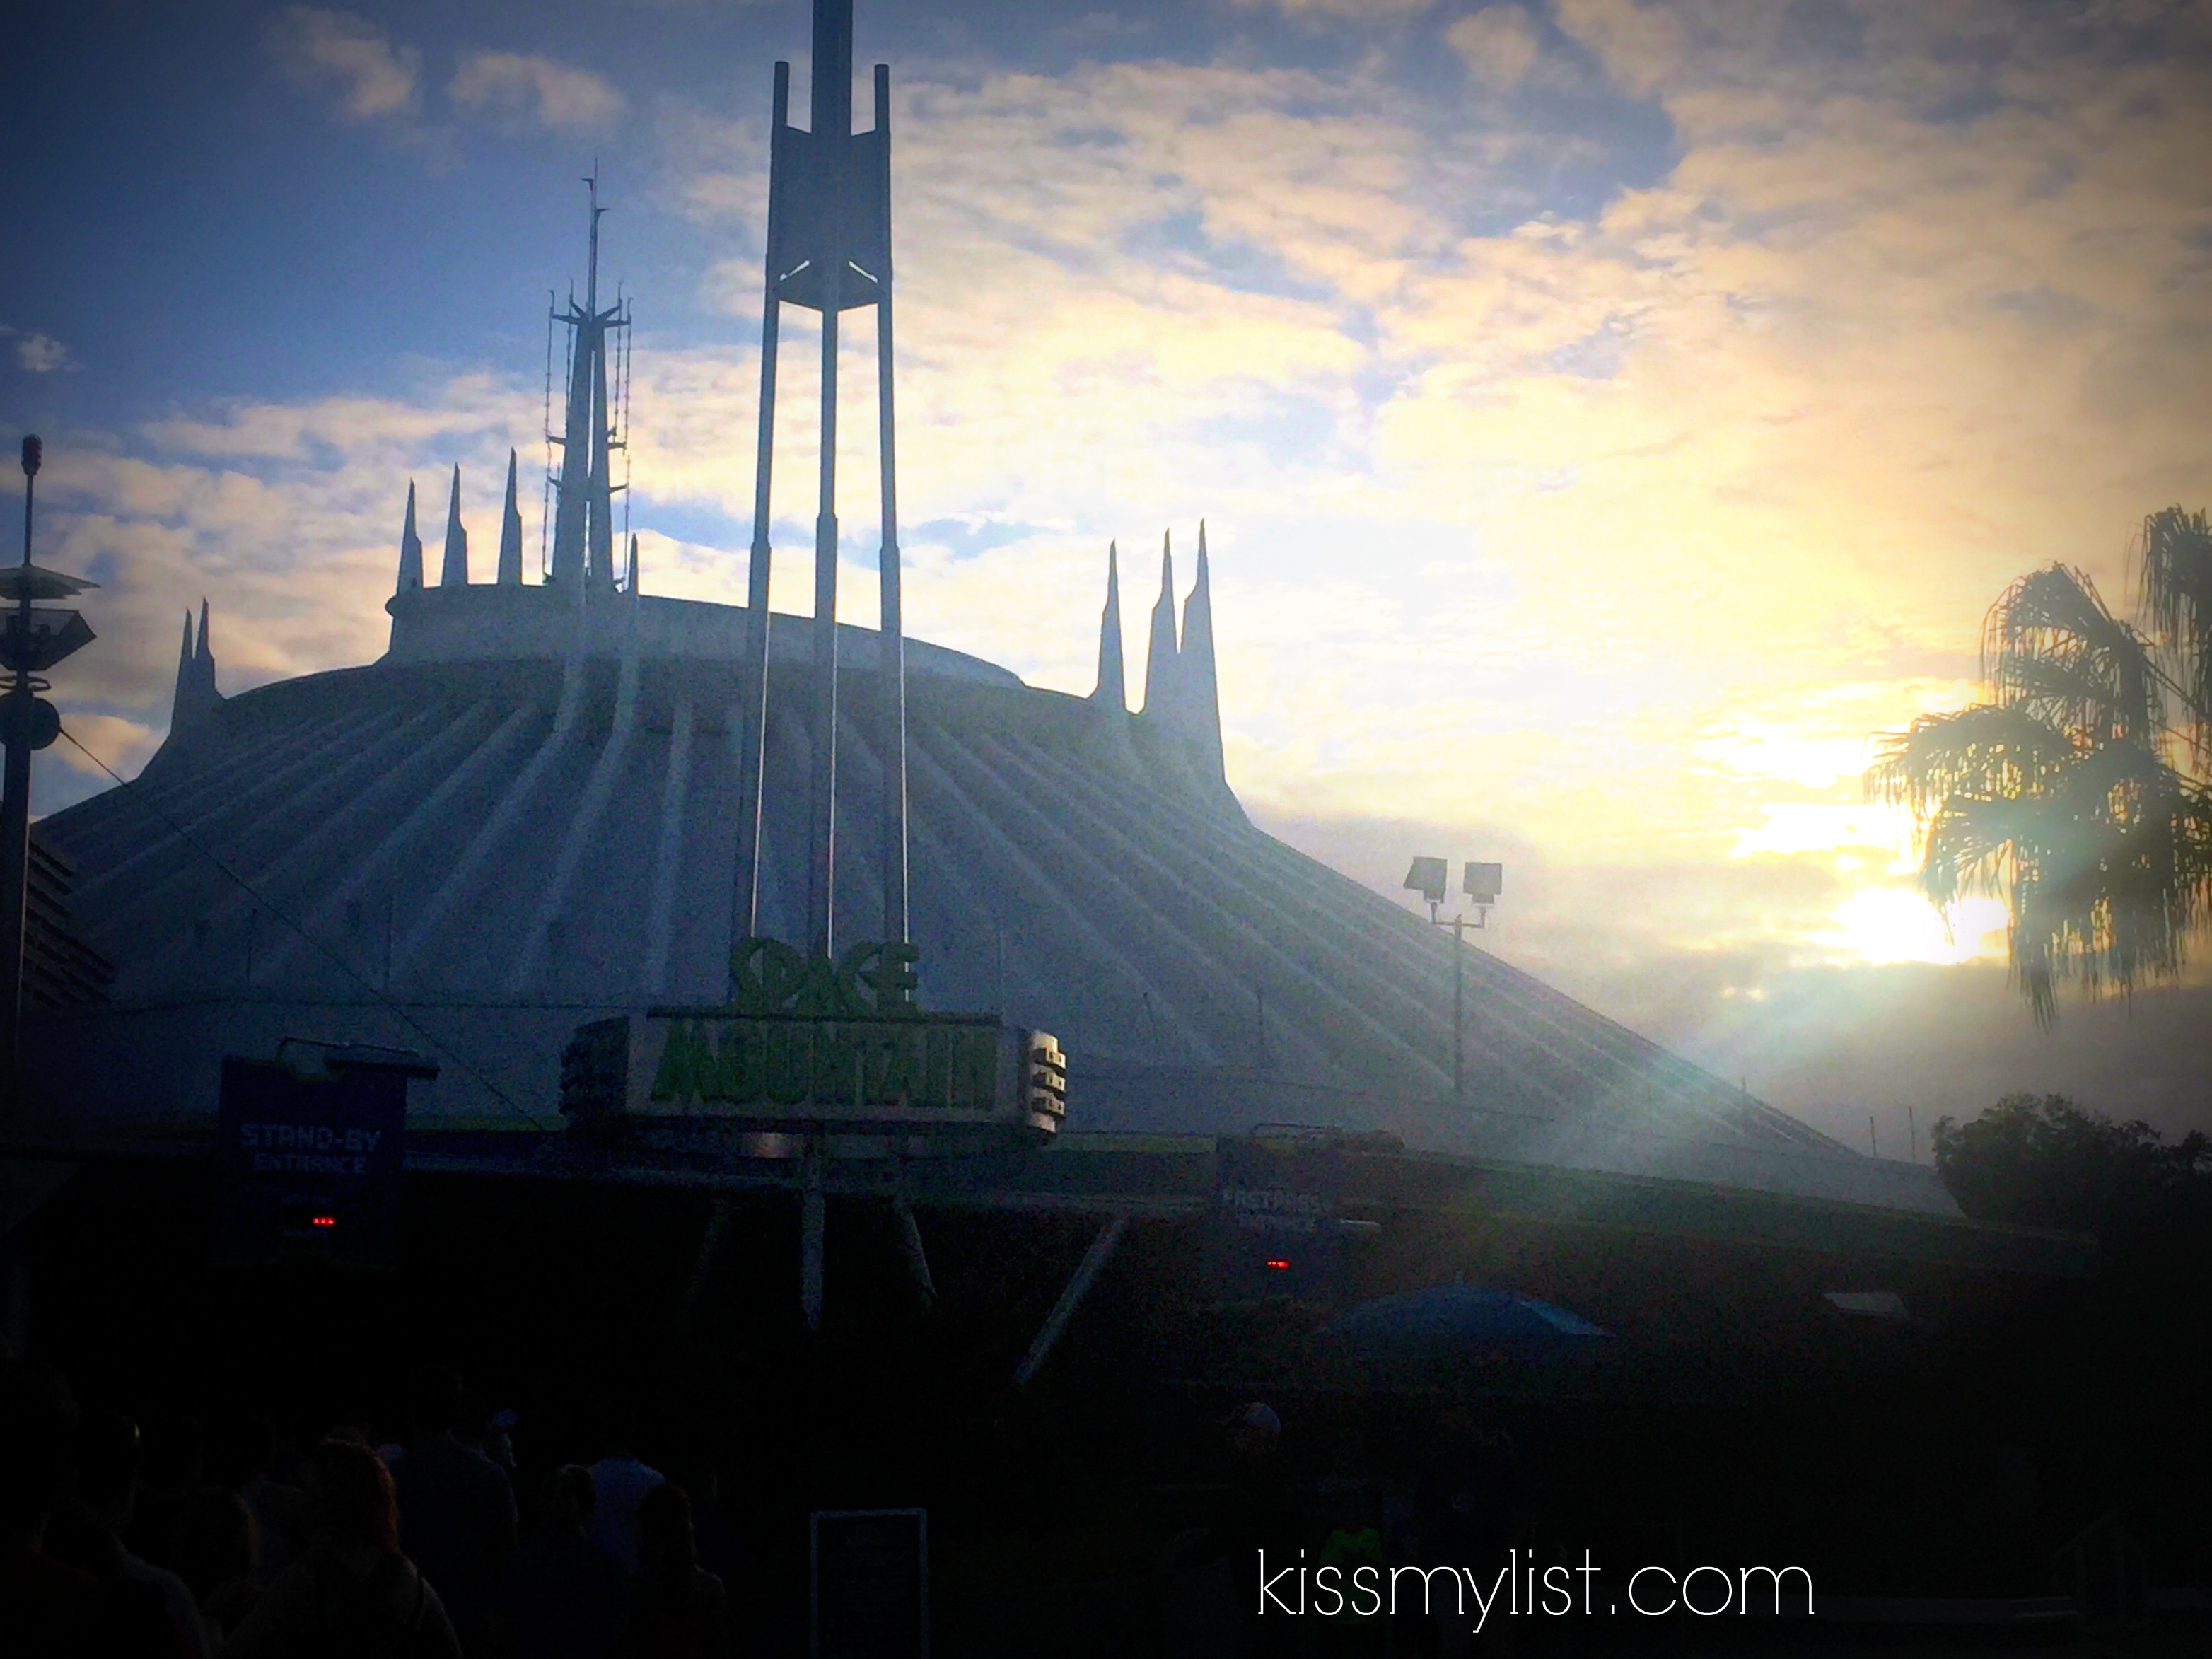 This is what Space Mountain looks like at 7:55 a.m.